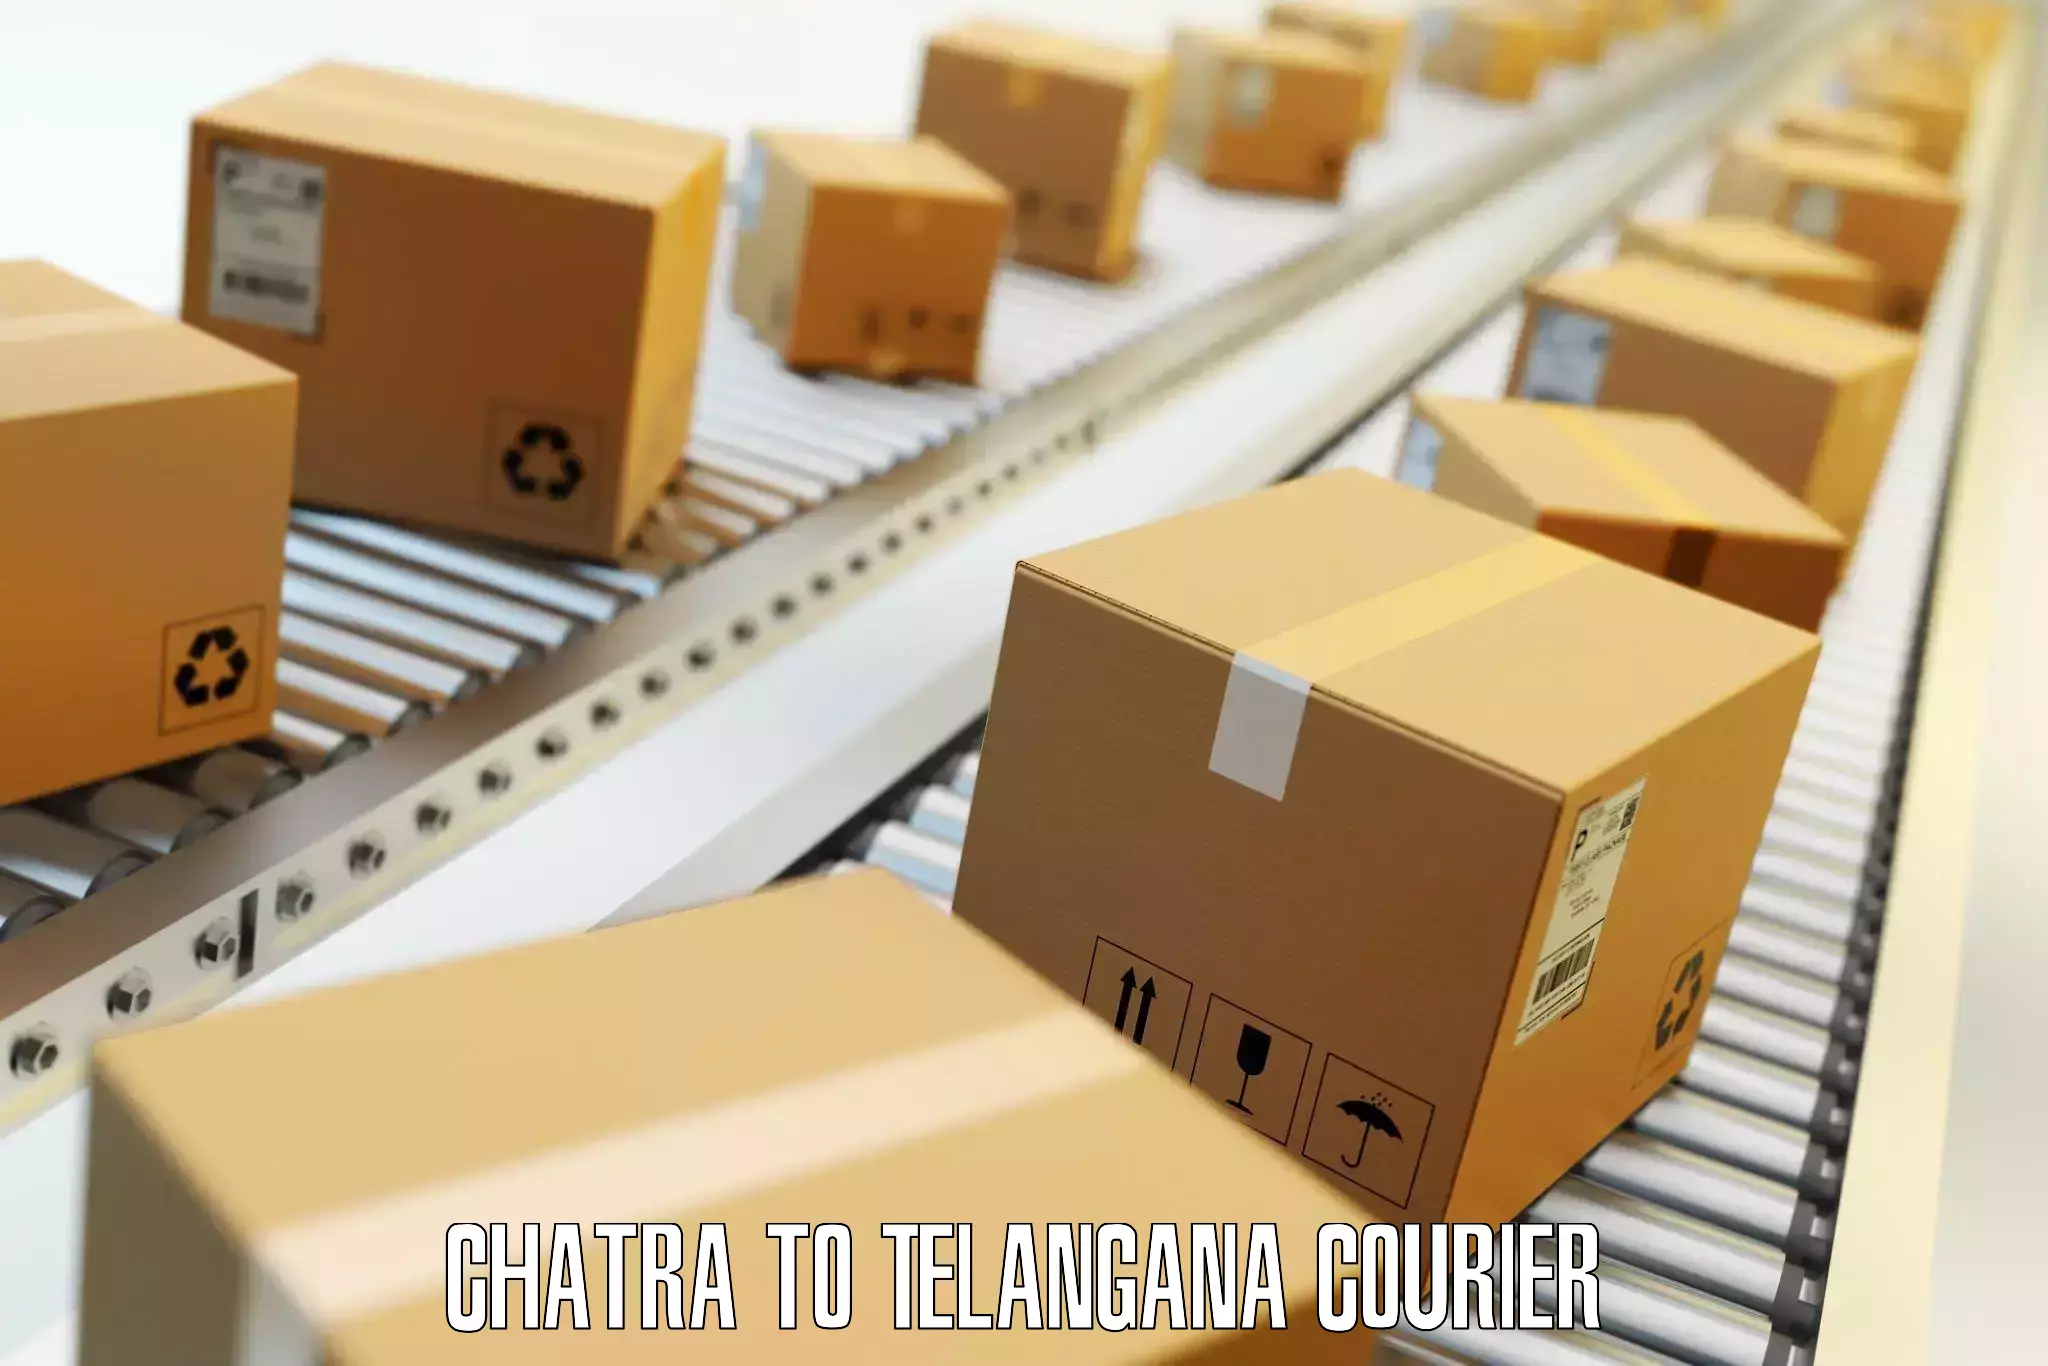 Luggage shipping service in Chatra to Mancherial